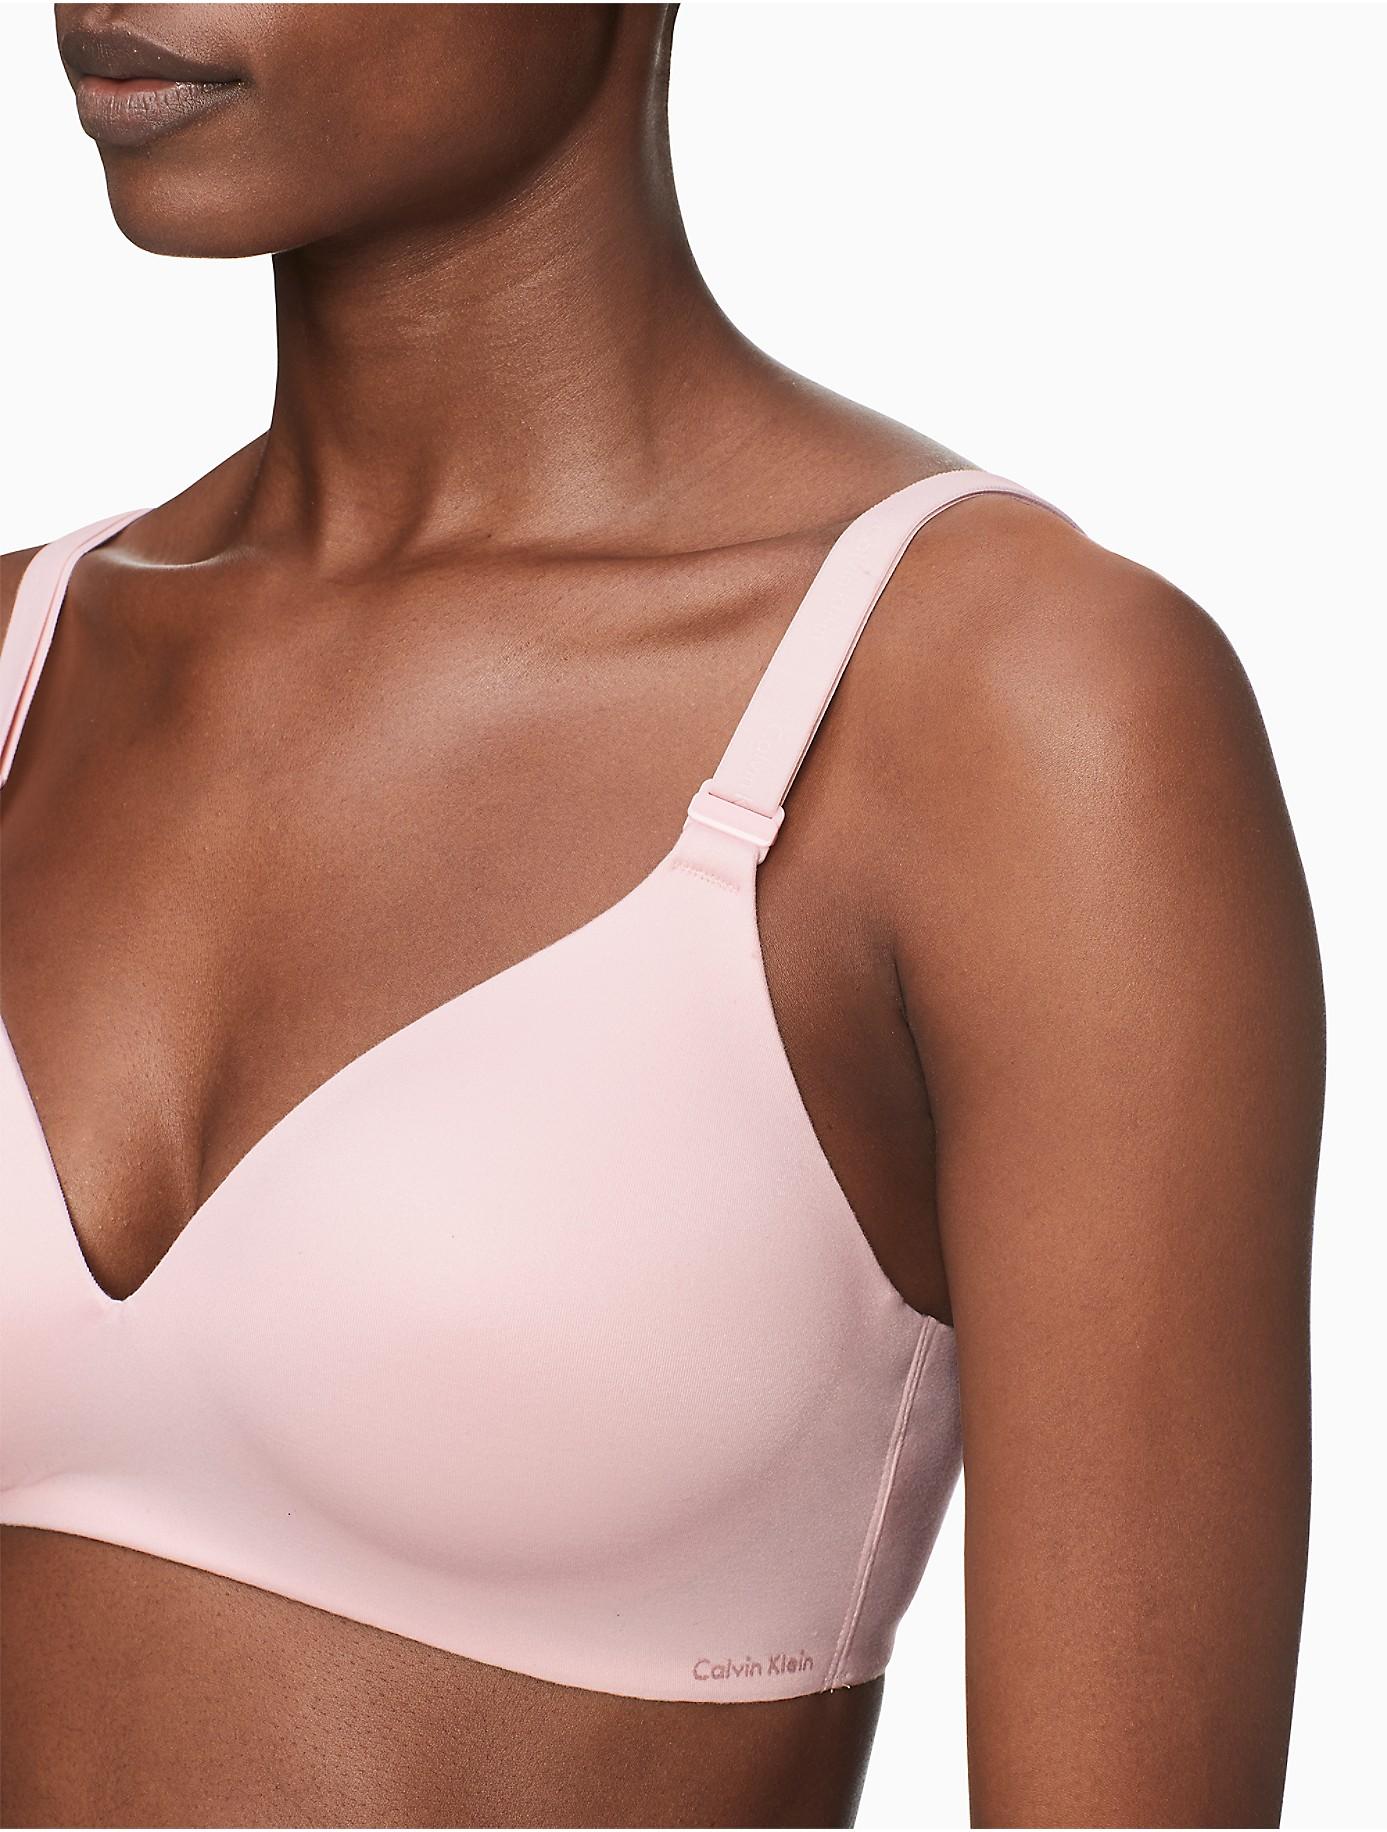 https://cdna.lystit.com/photos/calvinklein/58a3f18b/calvin-klein-NYMPTHS-THIGH-Perfectly-Fit-Lightly-Lined-Wirefree-Lounge-Bra.jpeg